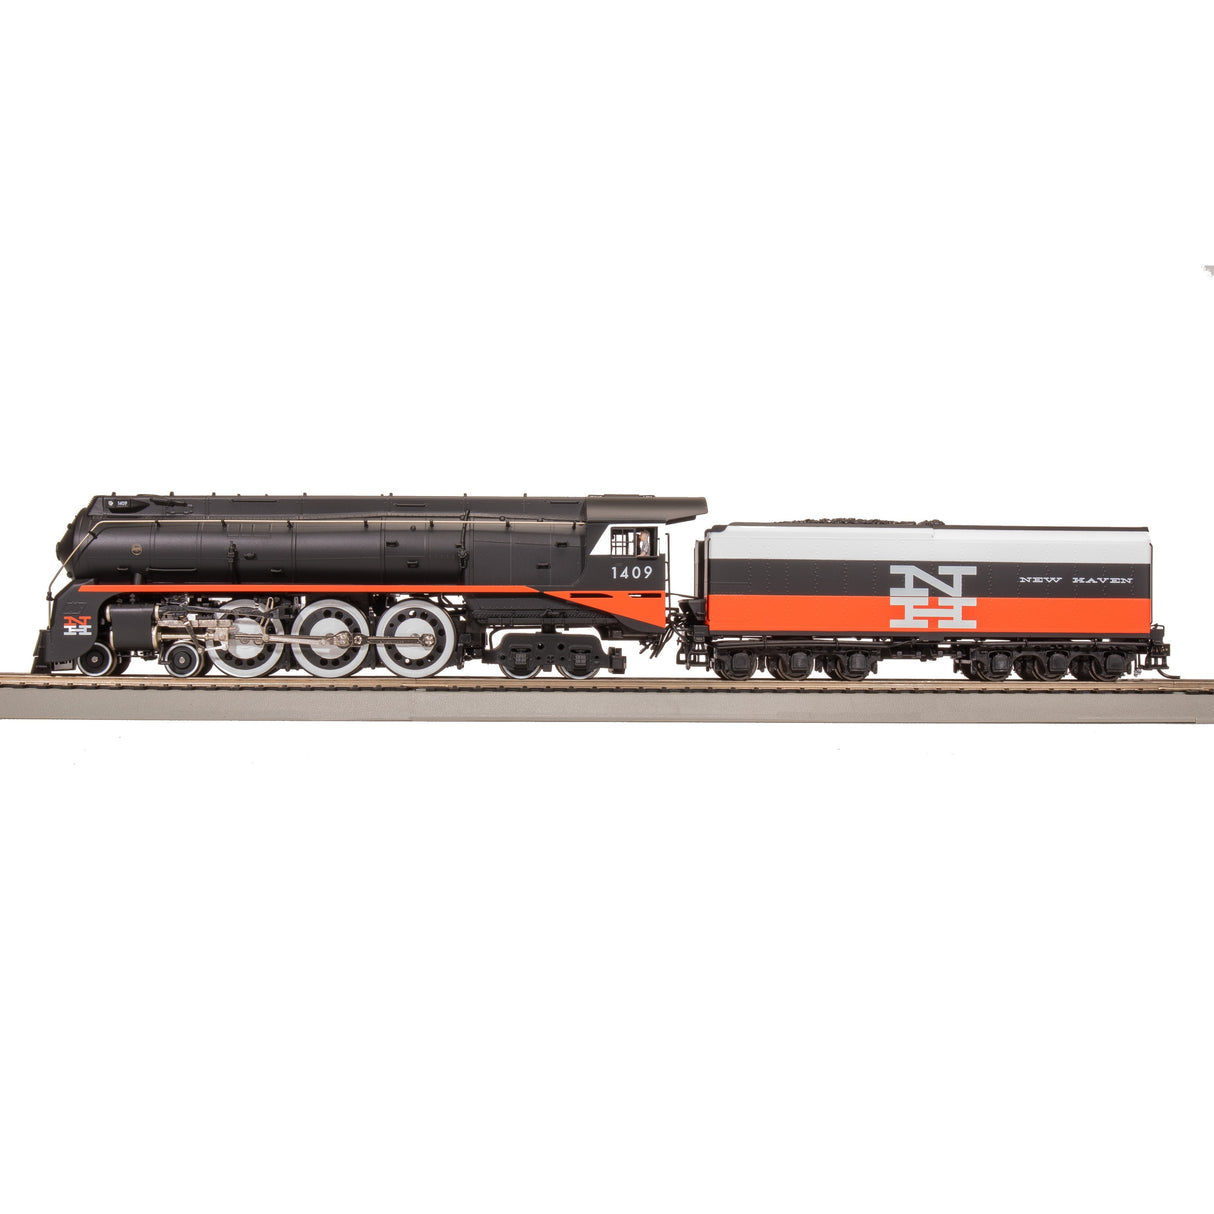 Broadway Limited HO Scale HY NH I-5 4-6-4 Steam Locomotive #1409/McGinnis Fantasy DC/DCC